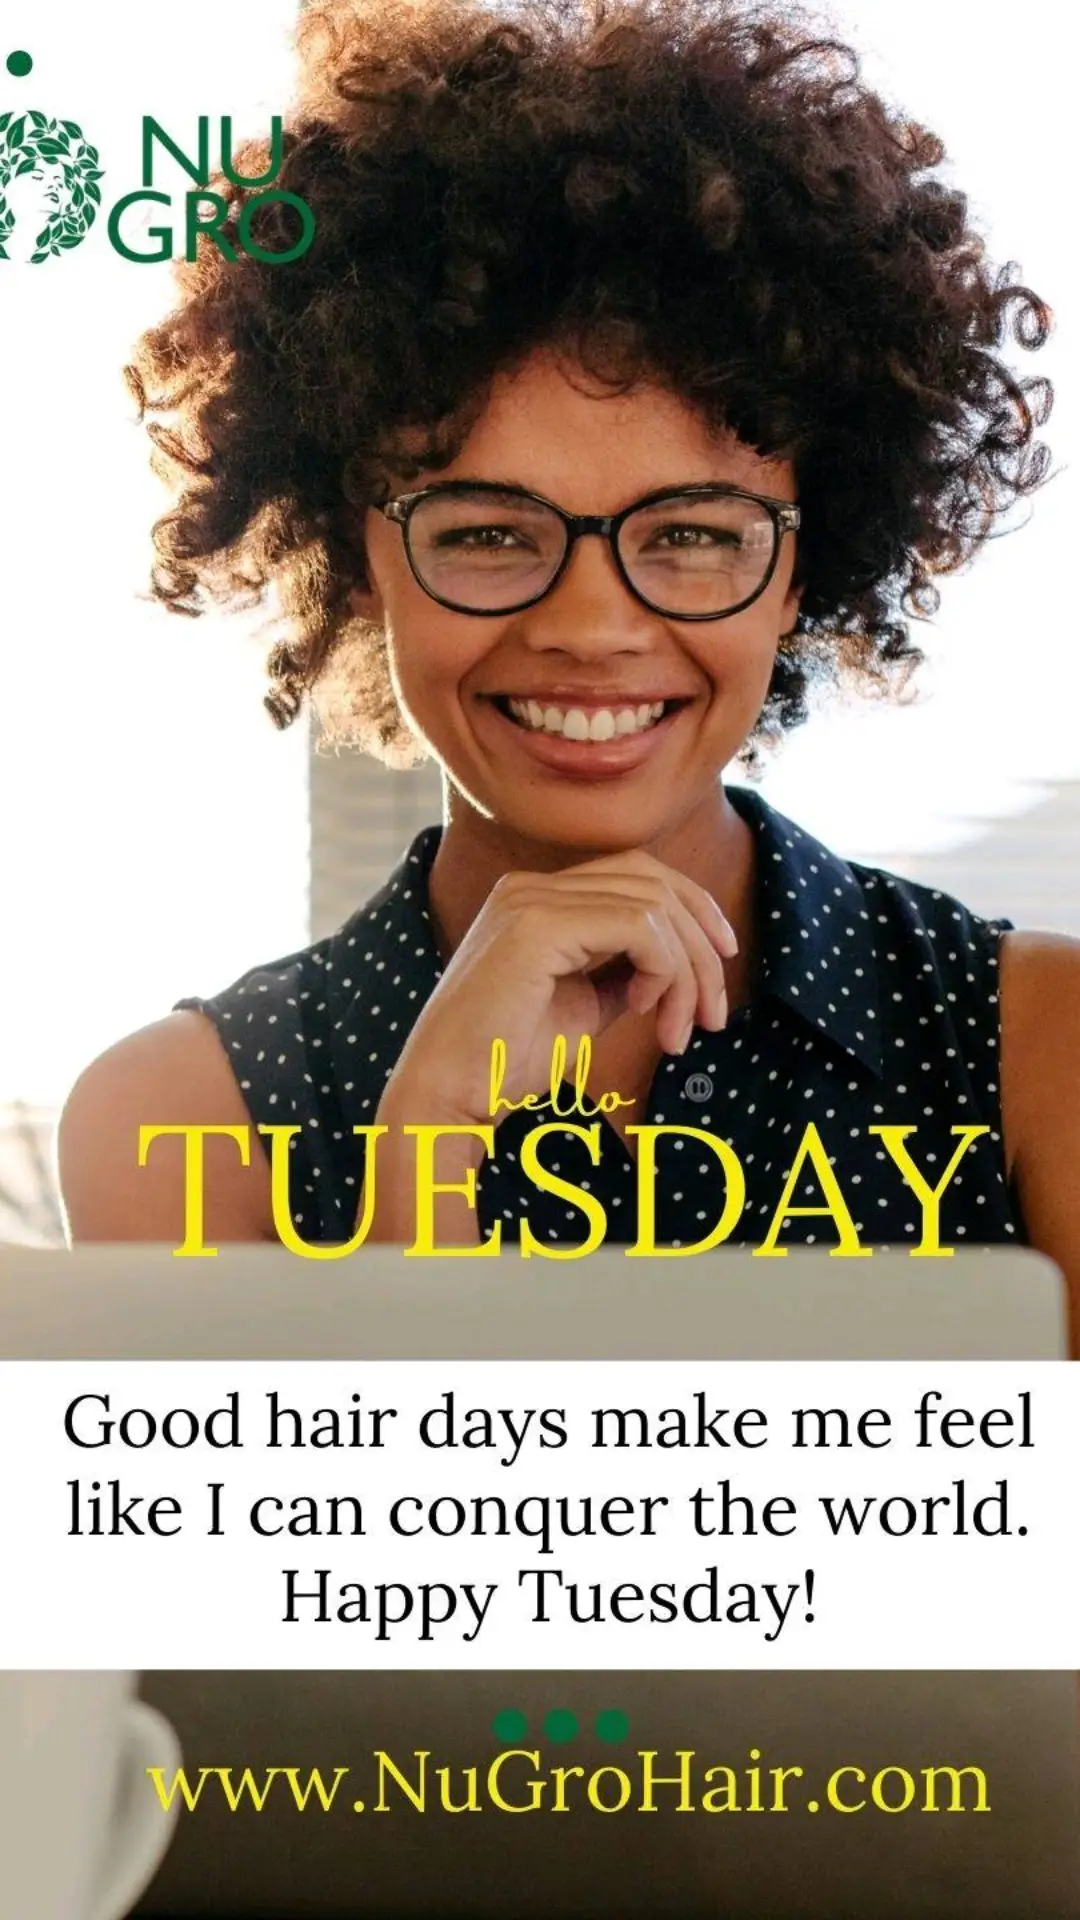 Elevate your hair game with NUGRO! 💫 Say goodbye to bad hair days and hello to a mane that radiates health and happiness. NUGRO - your secret to endless good hair days! ✨ #HairCareMagic #NUGROBeauty Find 🔗 https://linktr.ee/nugrohair or your local beauty supply store. Follow💛Share💛Like💛  Thank God for false hair, ponytails and weave. But Nugro grows hair like you won’t believe! Get a promo code today, by subscribing to our deals. Text NUGRO to 22828 to get started.  #TuesdayTresses #HairLoveTuesday #TransformingManes #TressTuesdayMagic #HealthyHairJourney #TuesdayHairCare #ShineOnTuesday #HairGoalsTuesday #SalonReady #TangleFreeTuesday #curlyhair #curlyhairgal #naturalhairgrowth #naturalhairrocks #fyp #hairfyp 